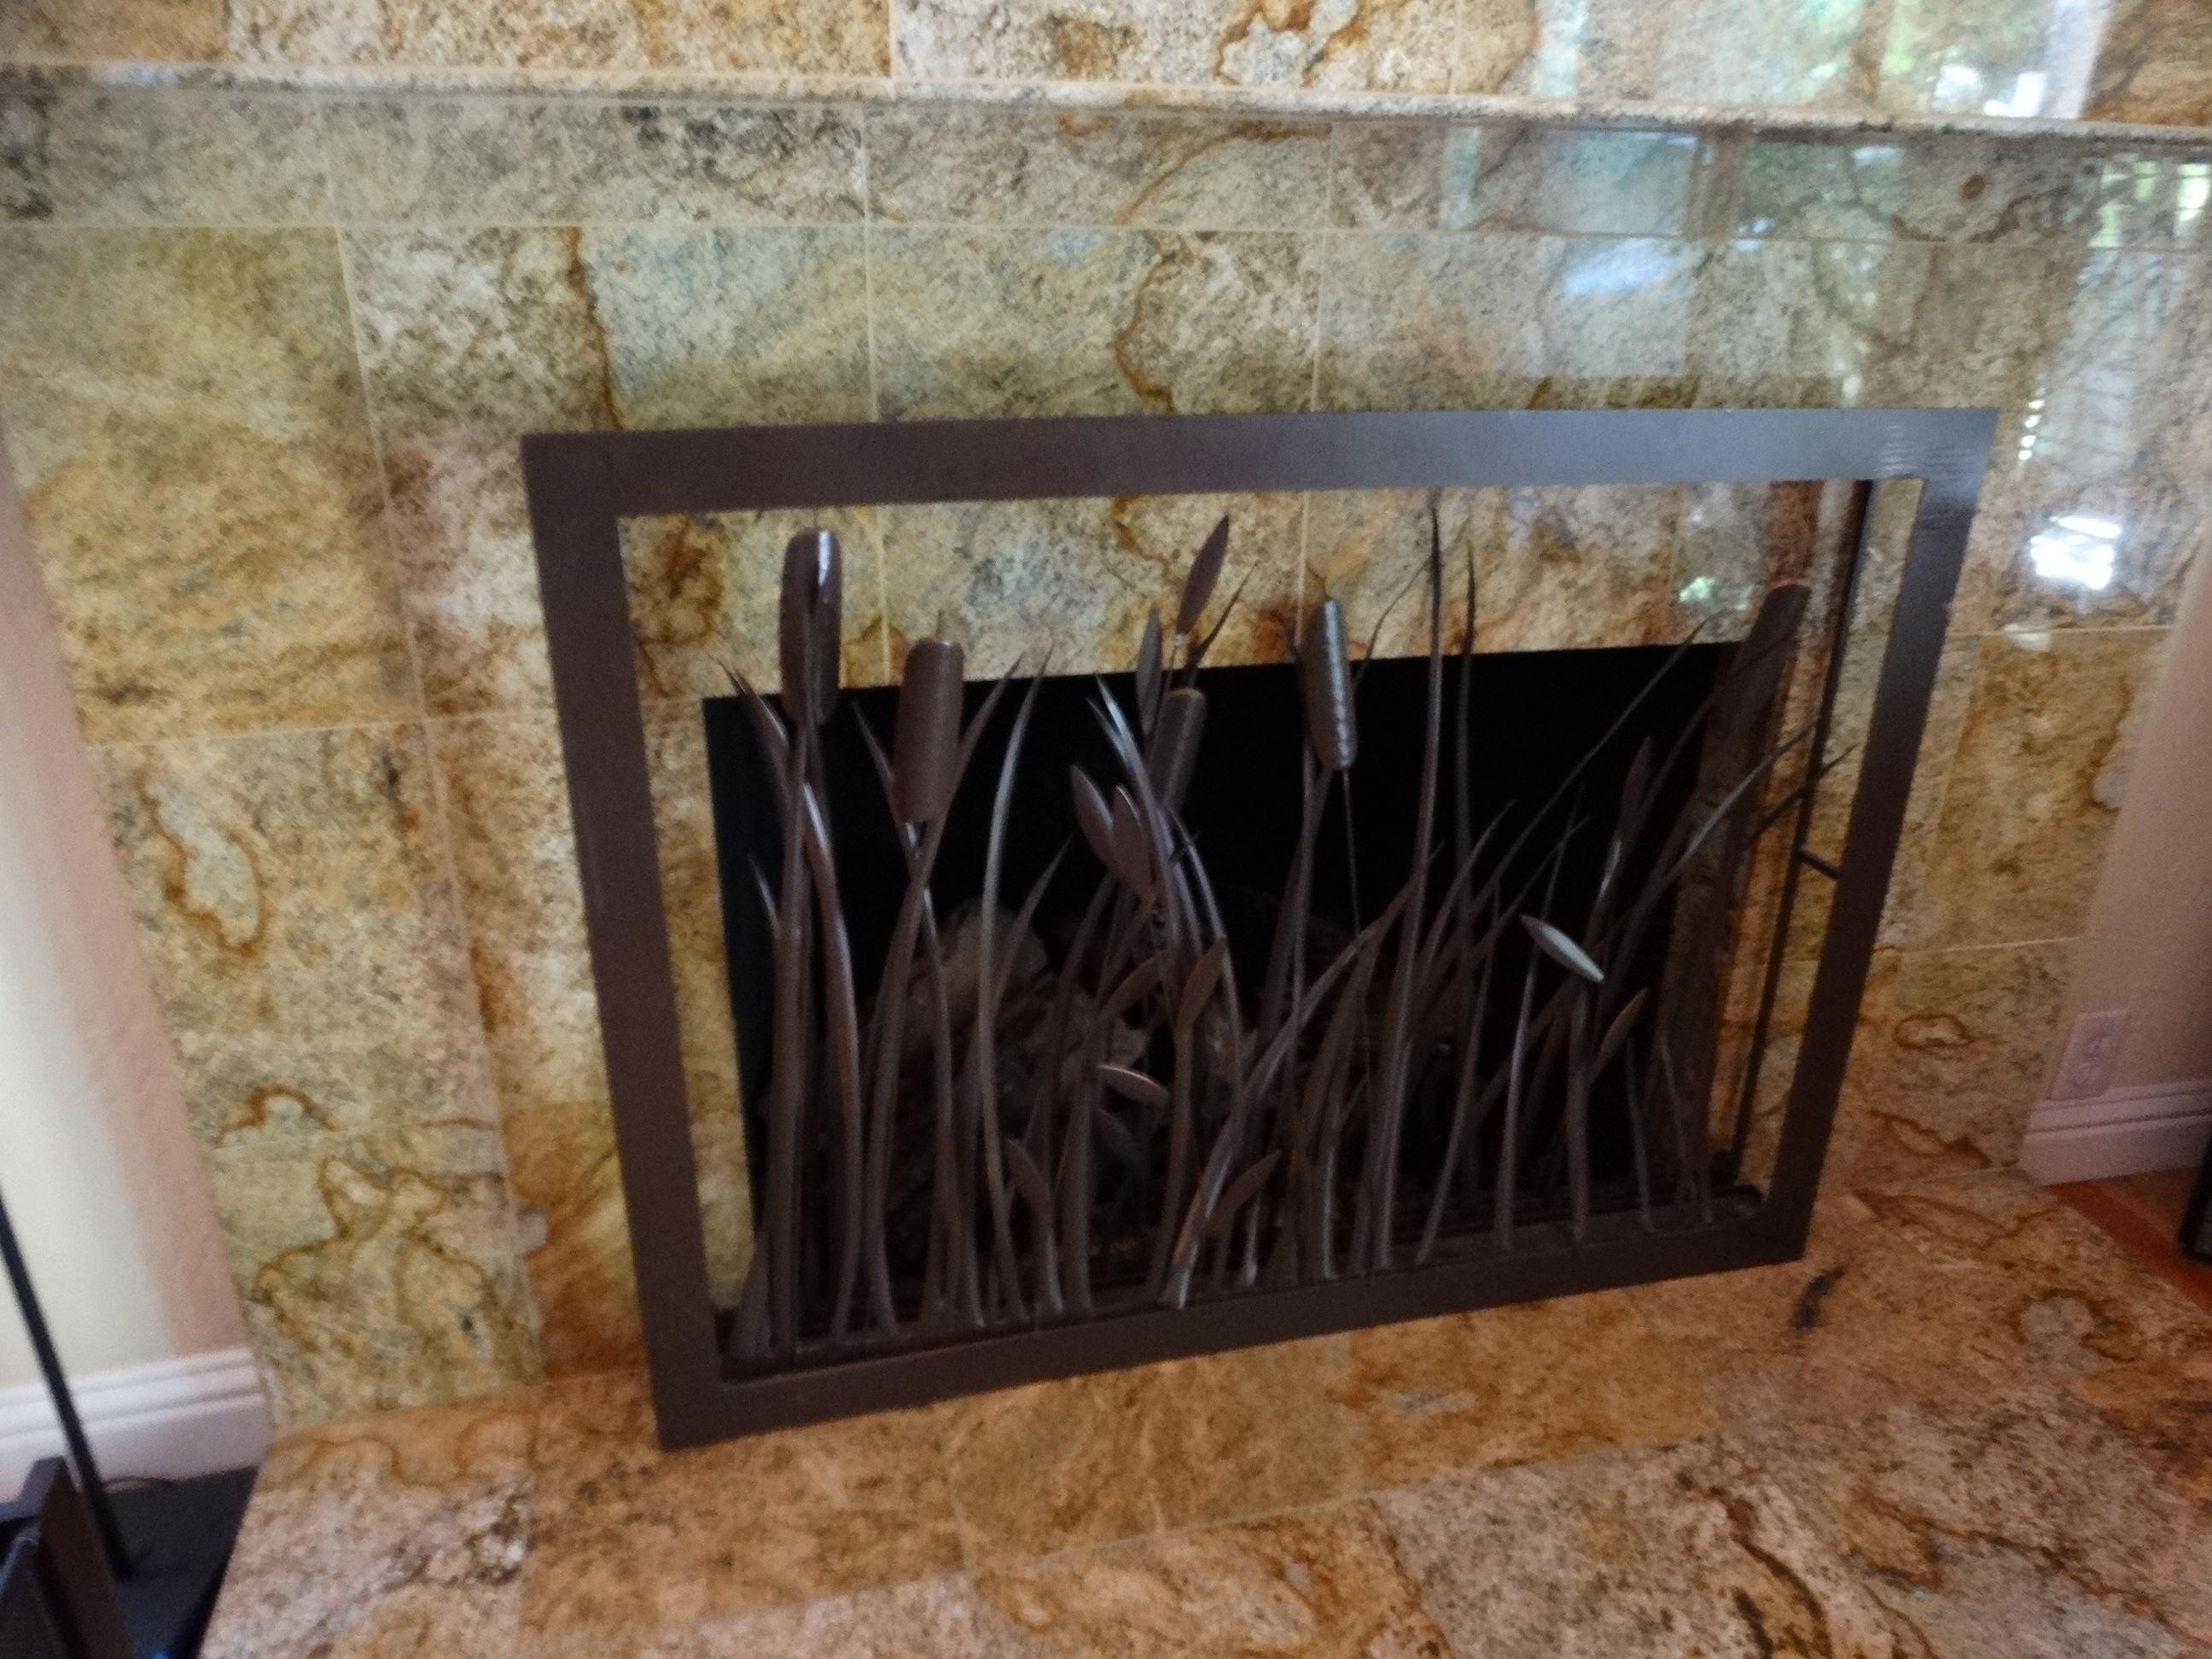 Storage box, Bamboo shoots, Metal fire place surround and more